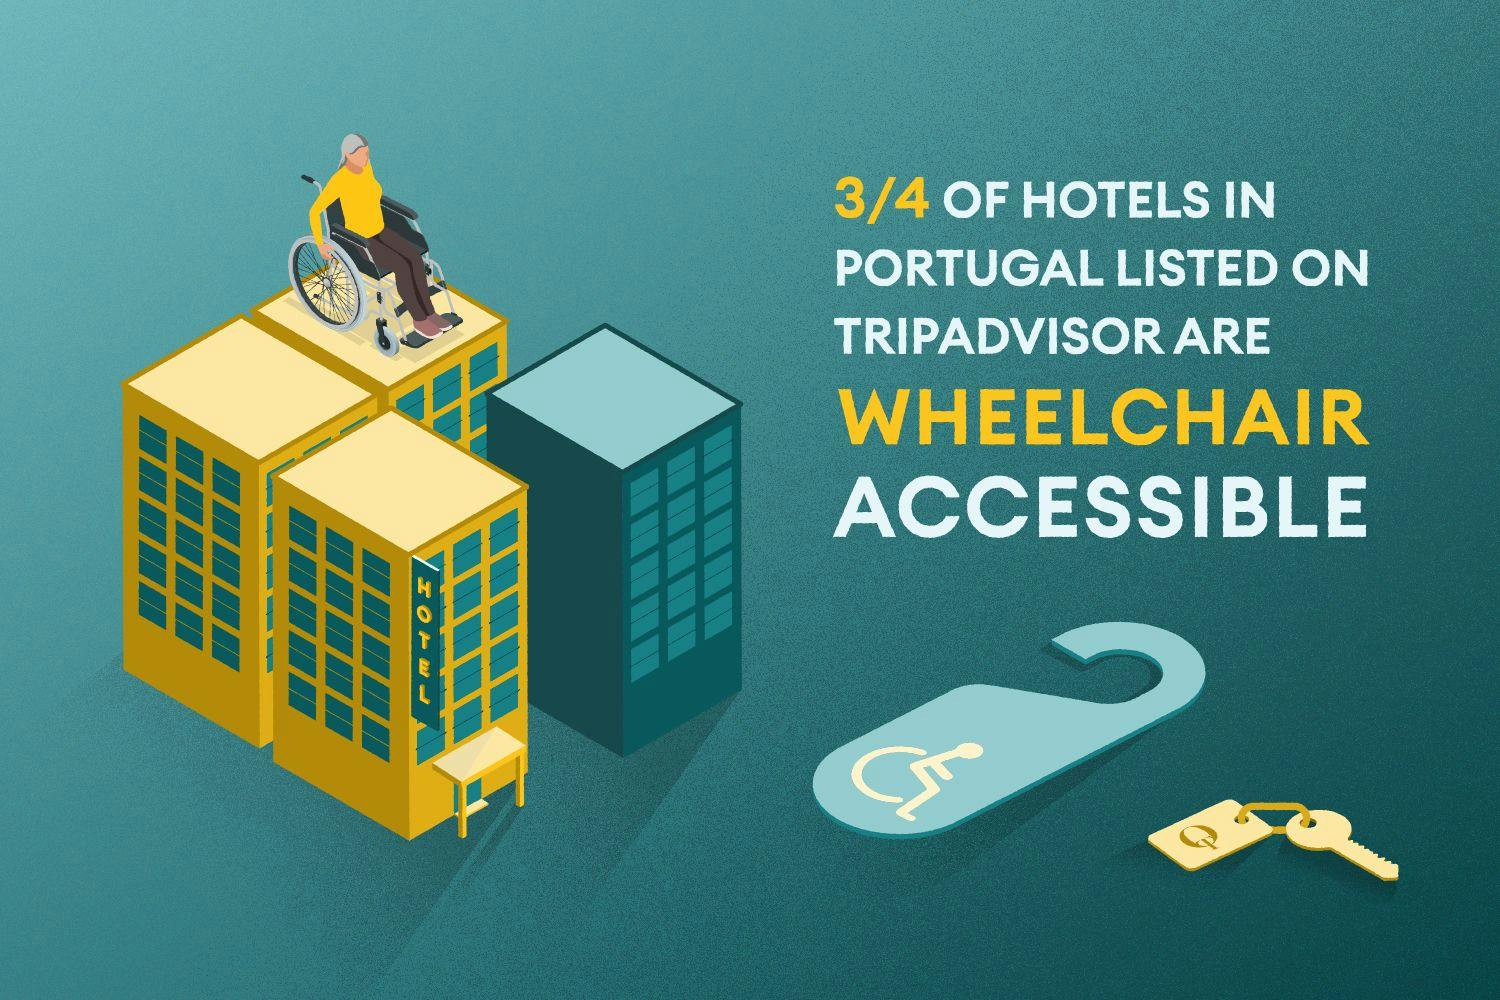 3/4 of hotels in Portugal listed on Tripadvisor or wheelchair accessible 